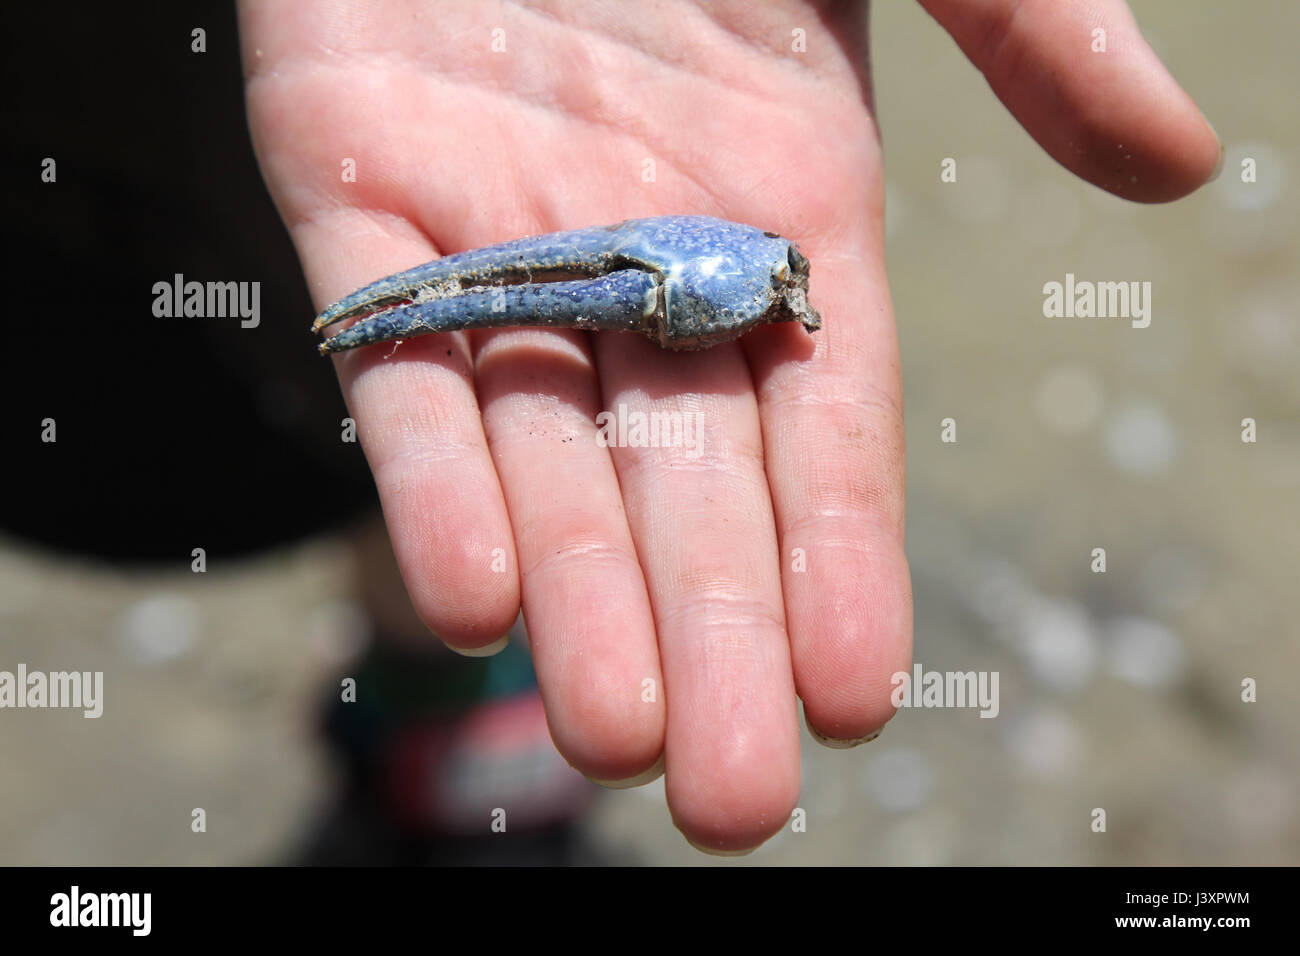 Blue crayfish claw on person's hand. Stock Photo